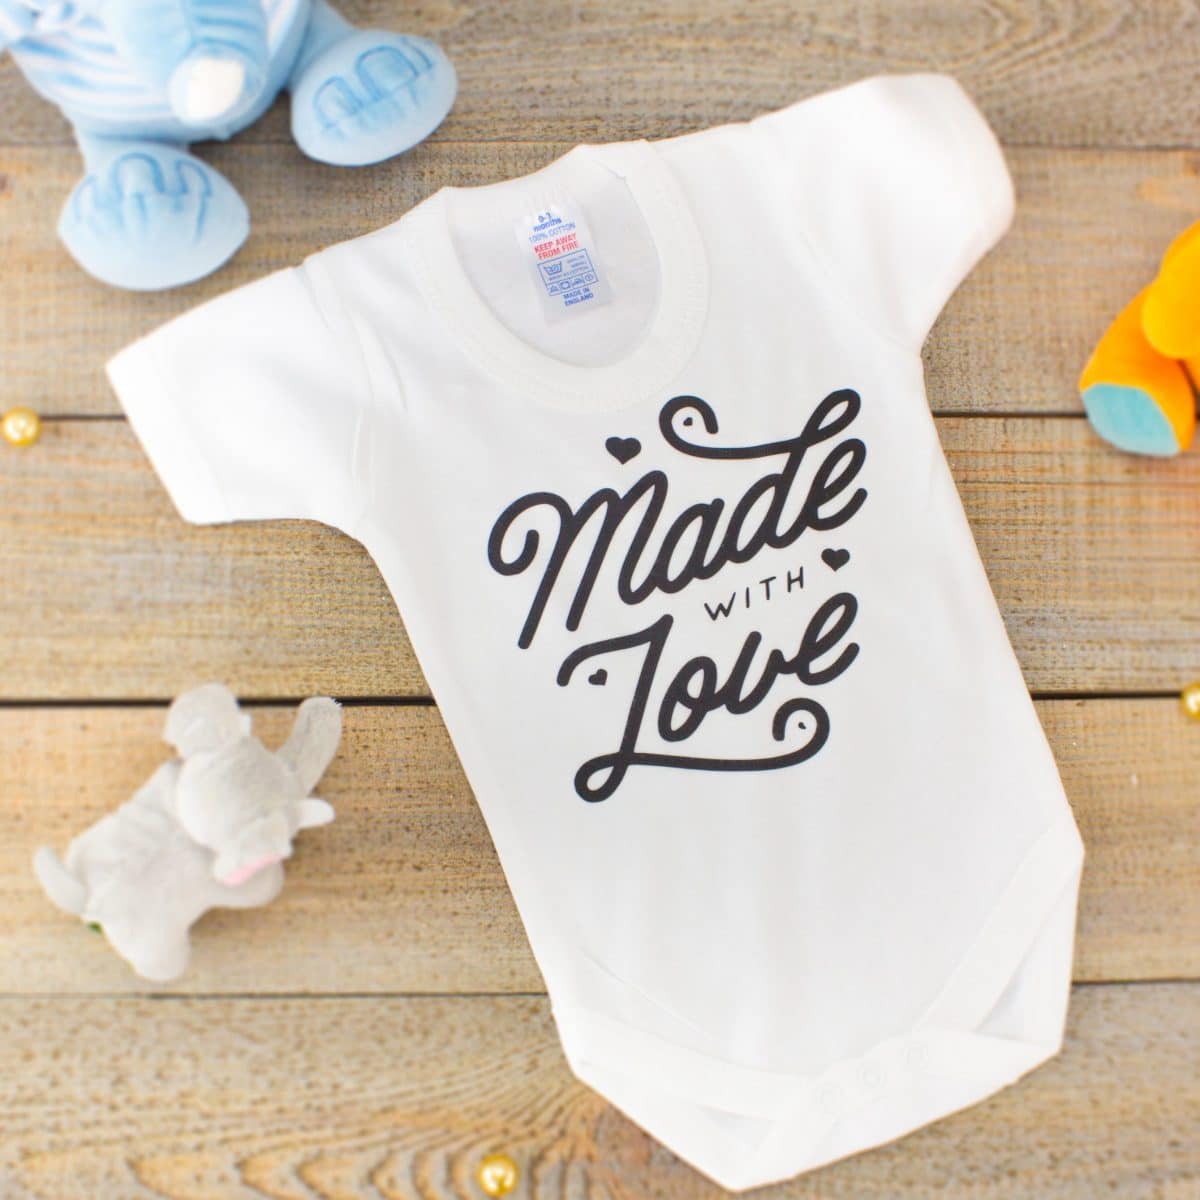 “Made With Love” – T-shirt/Bodysuit